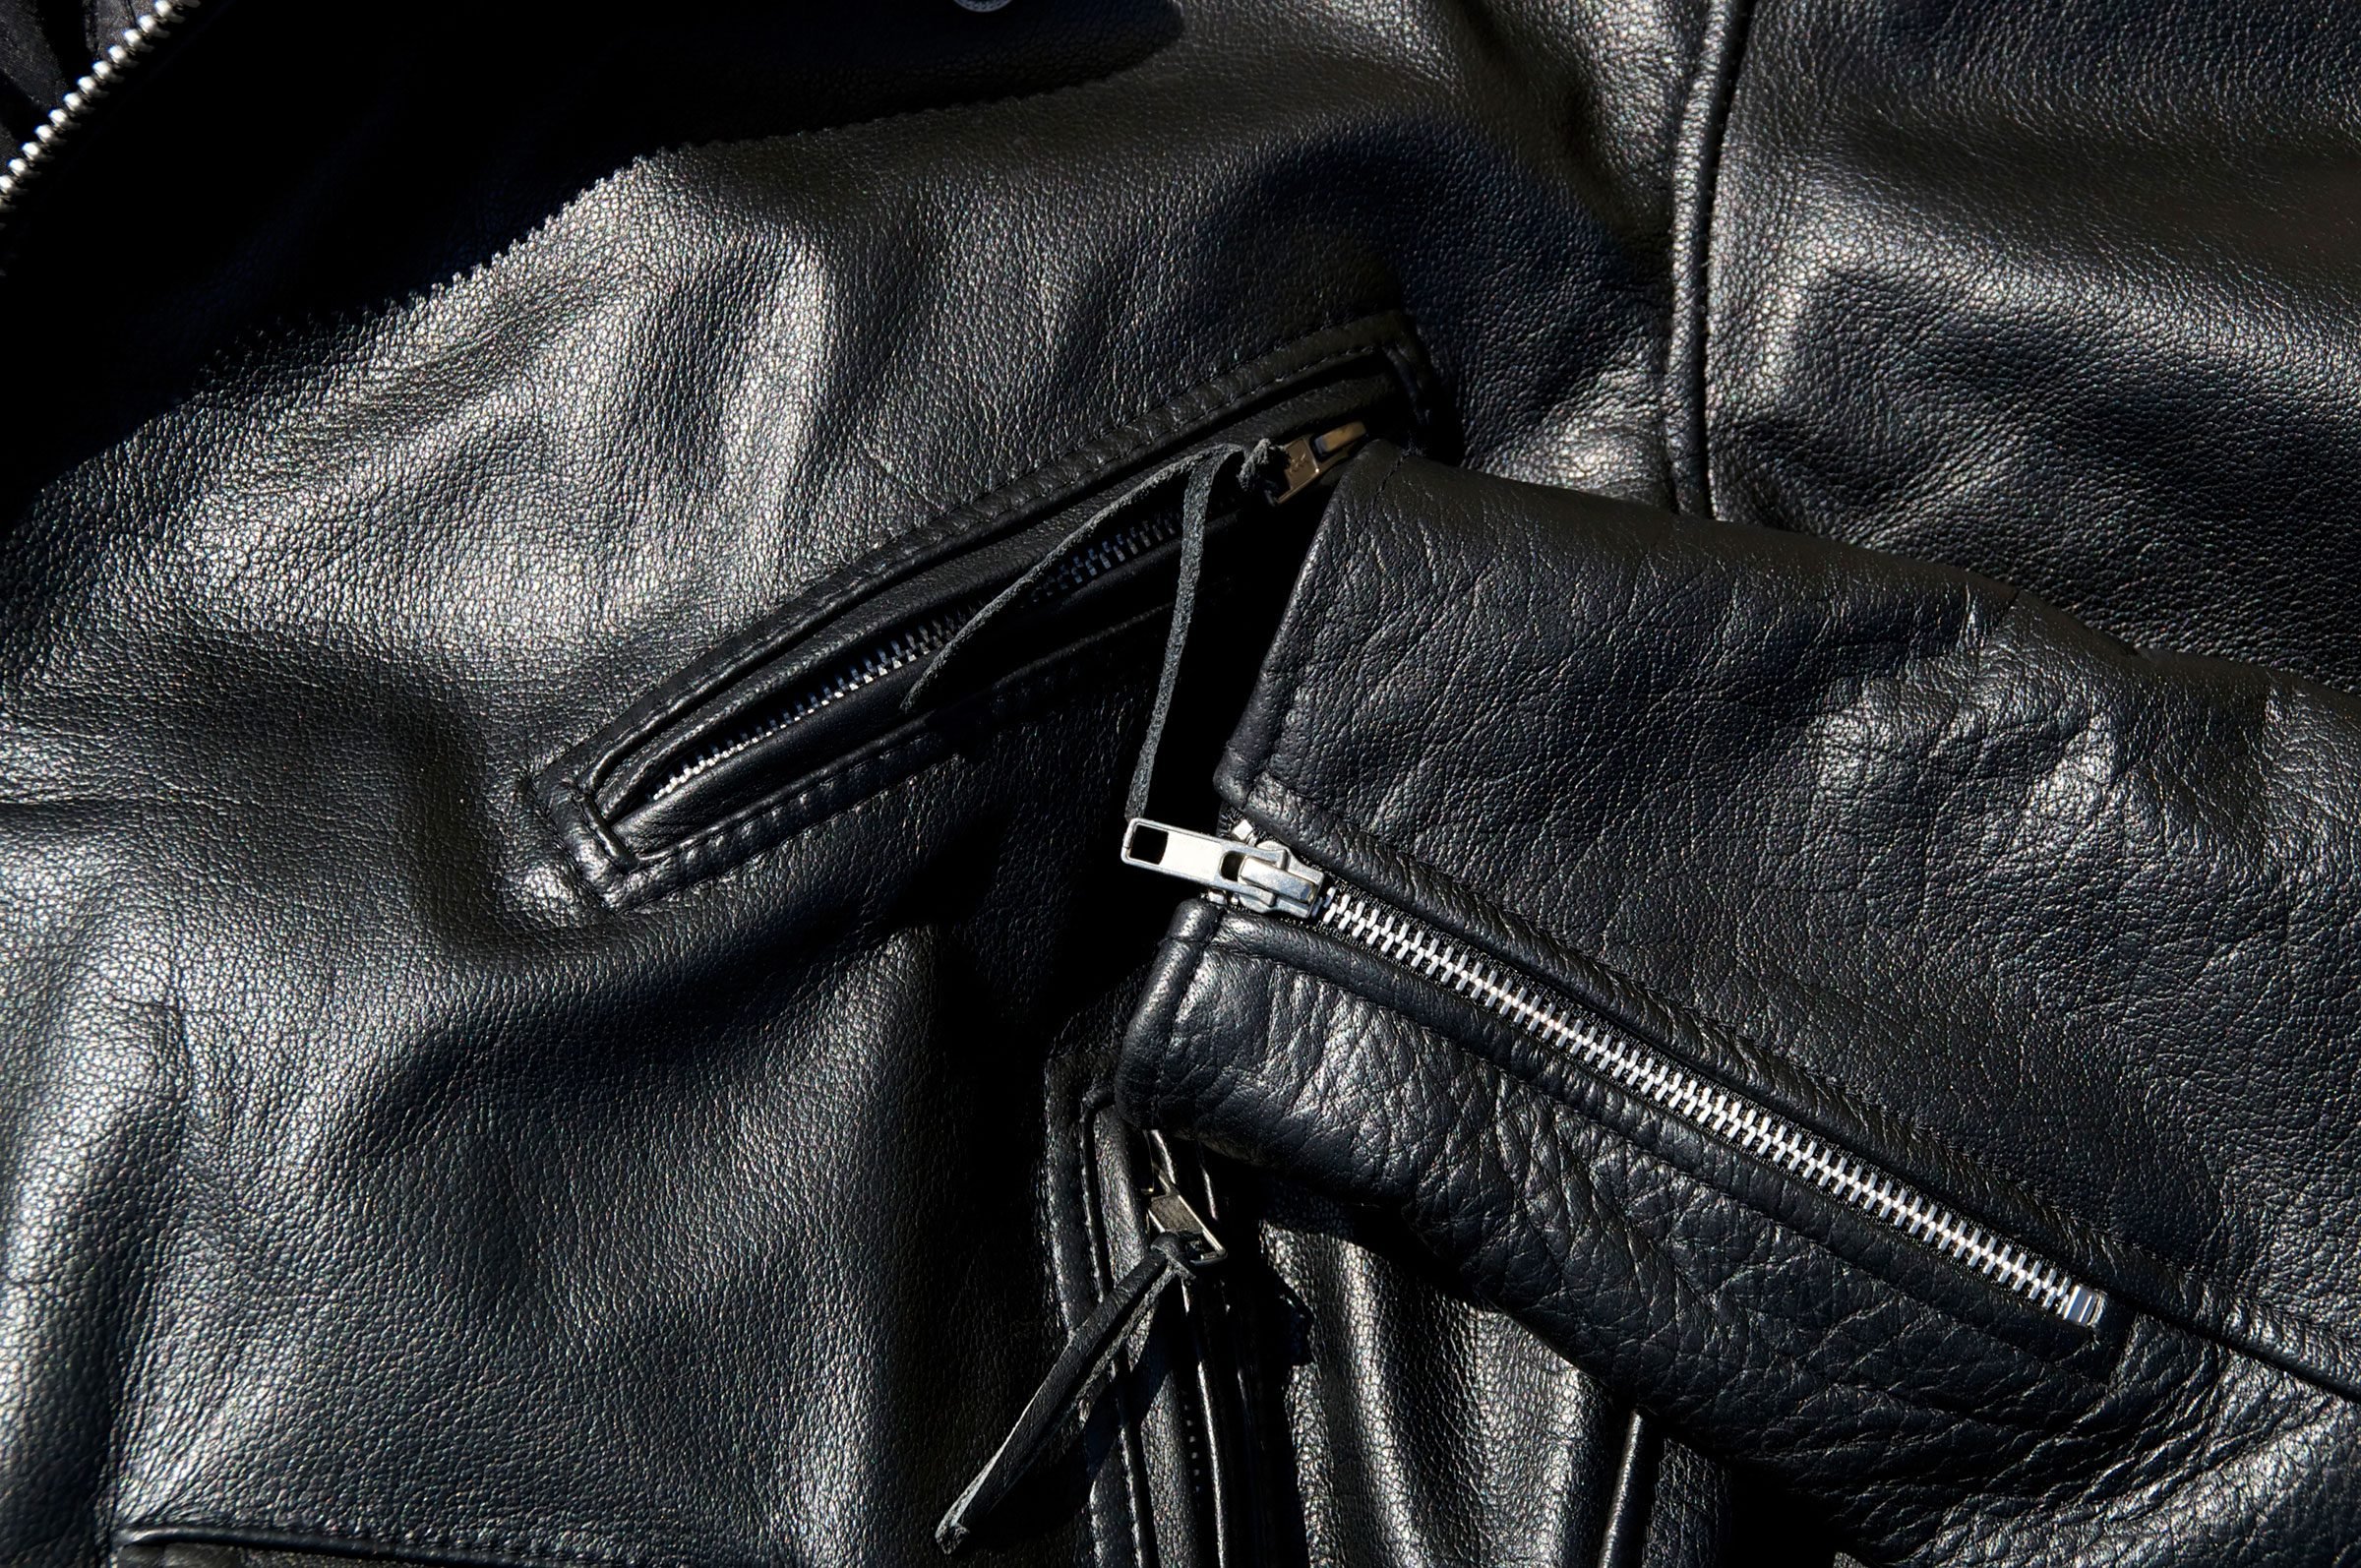 What is the way to fix a squeaky leather jacket?